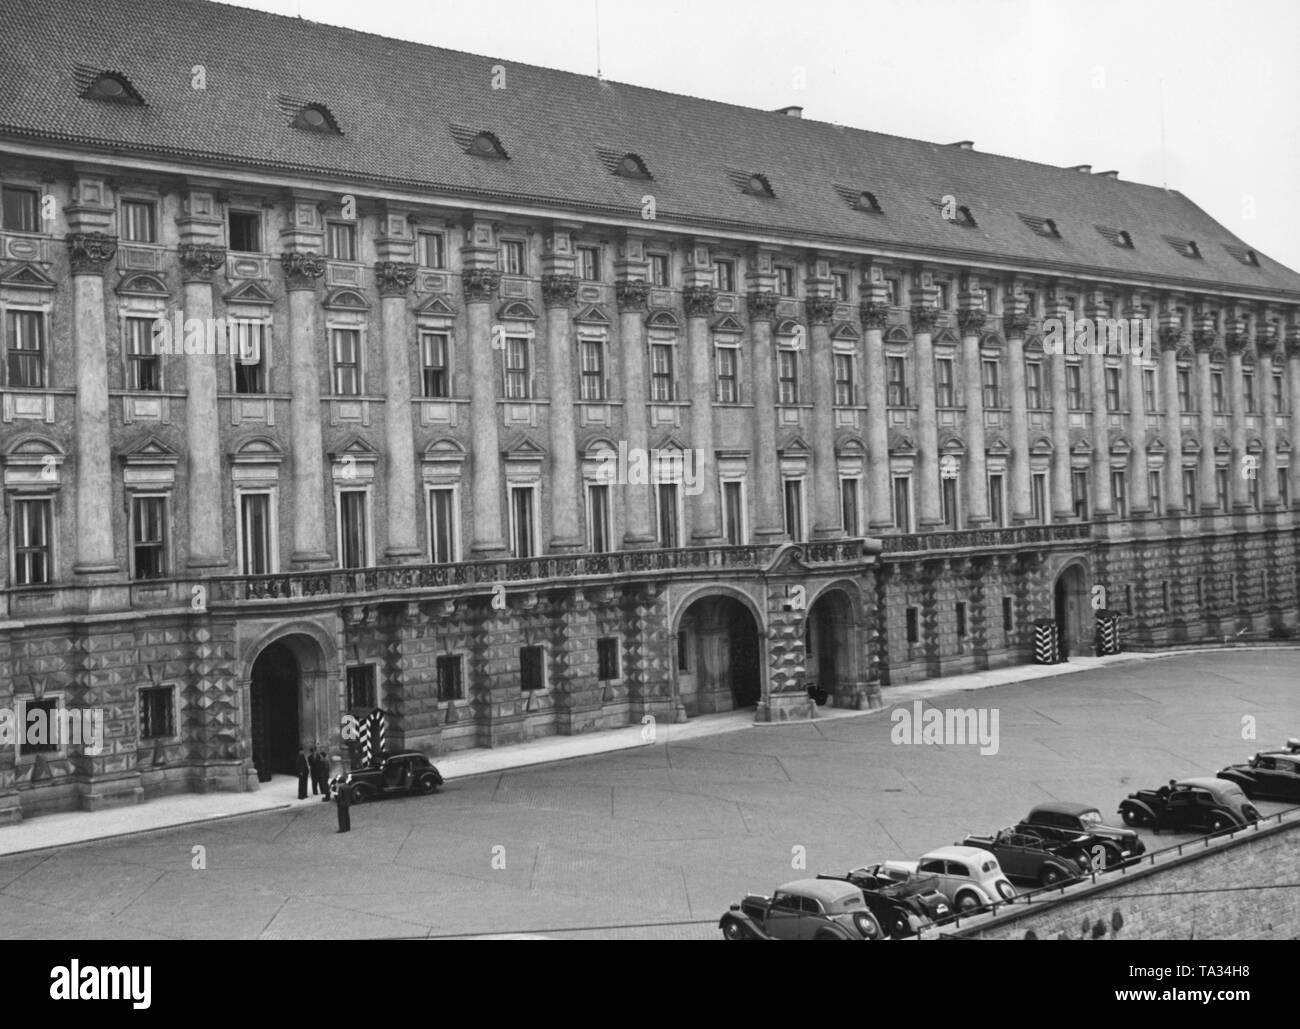 The seat of the Reich Protector for Bohemia and Moravia, Konstantin von Neurath,, is situated in the Czernin Palace. Since March 1939, the areas of Bohemia and Moravia had been under German occupation. Stock Photo